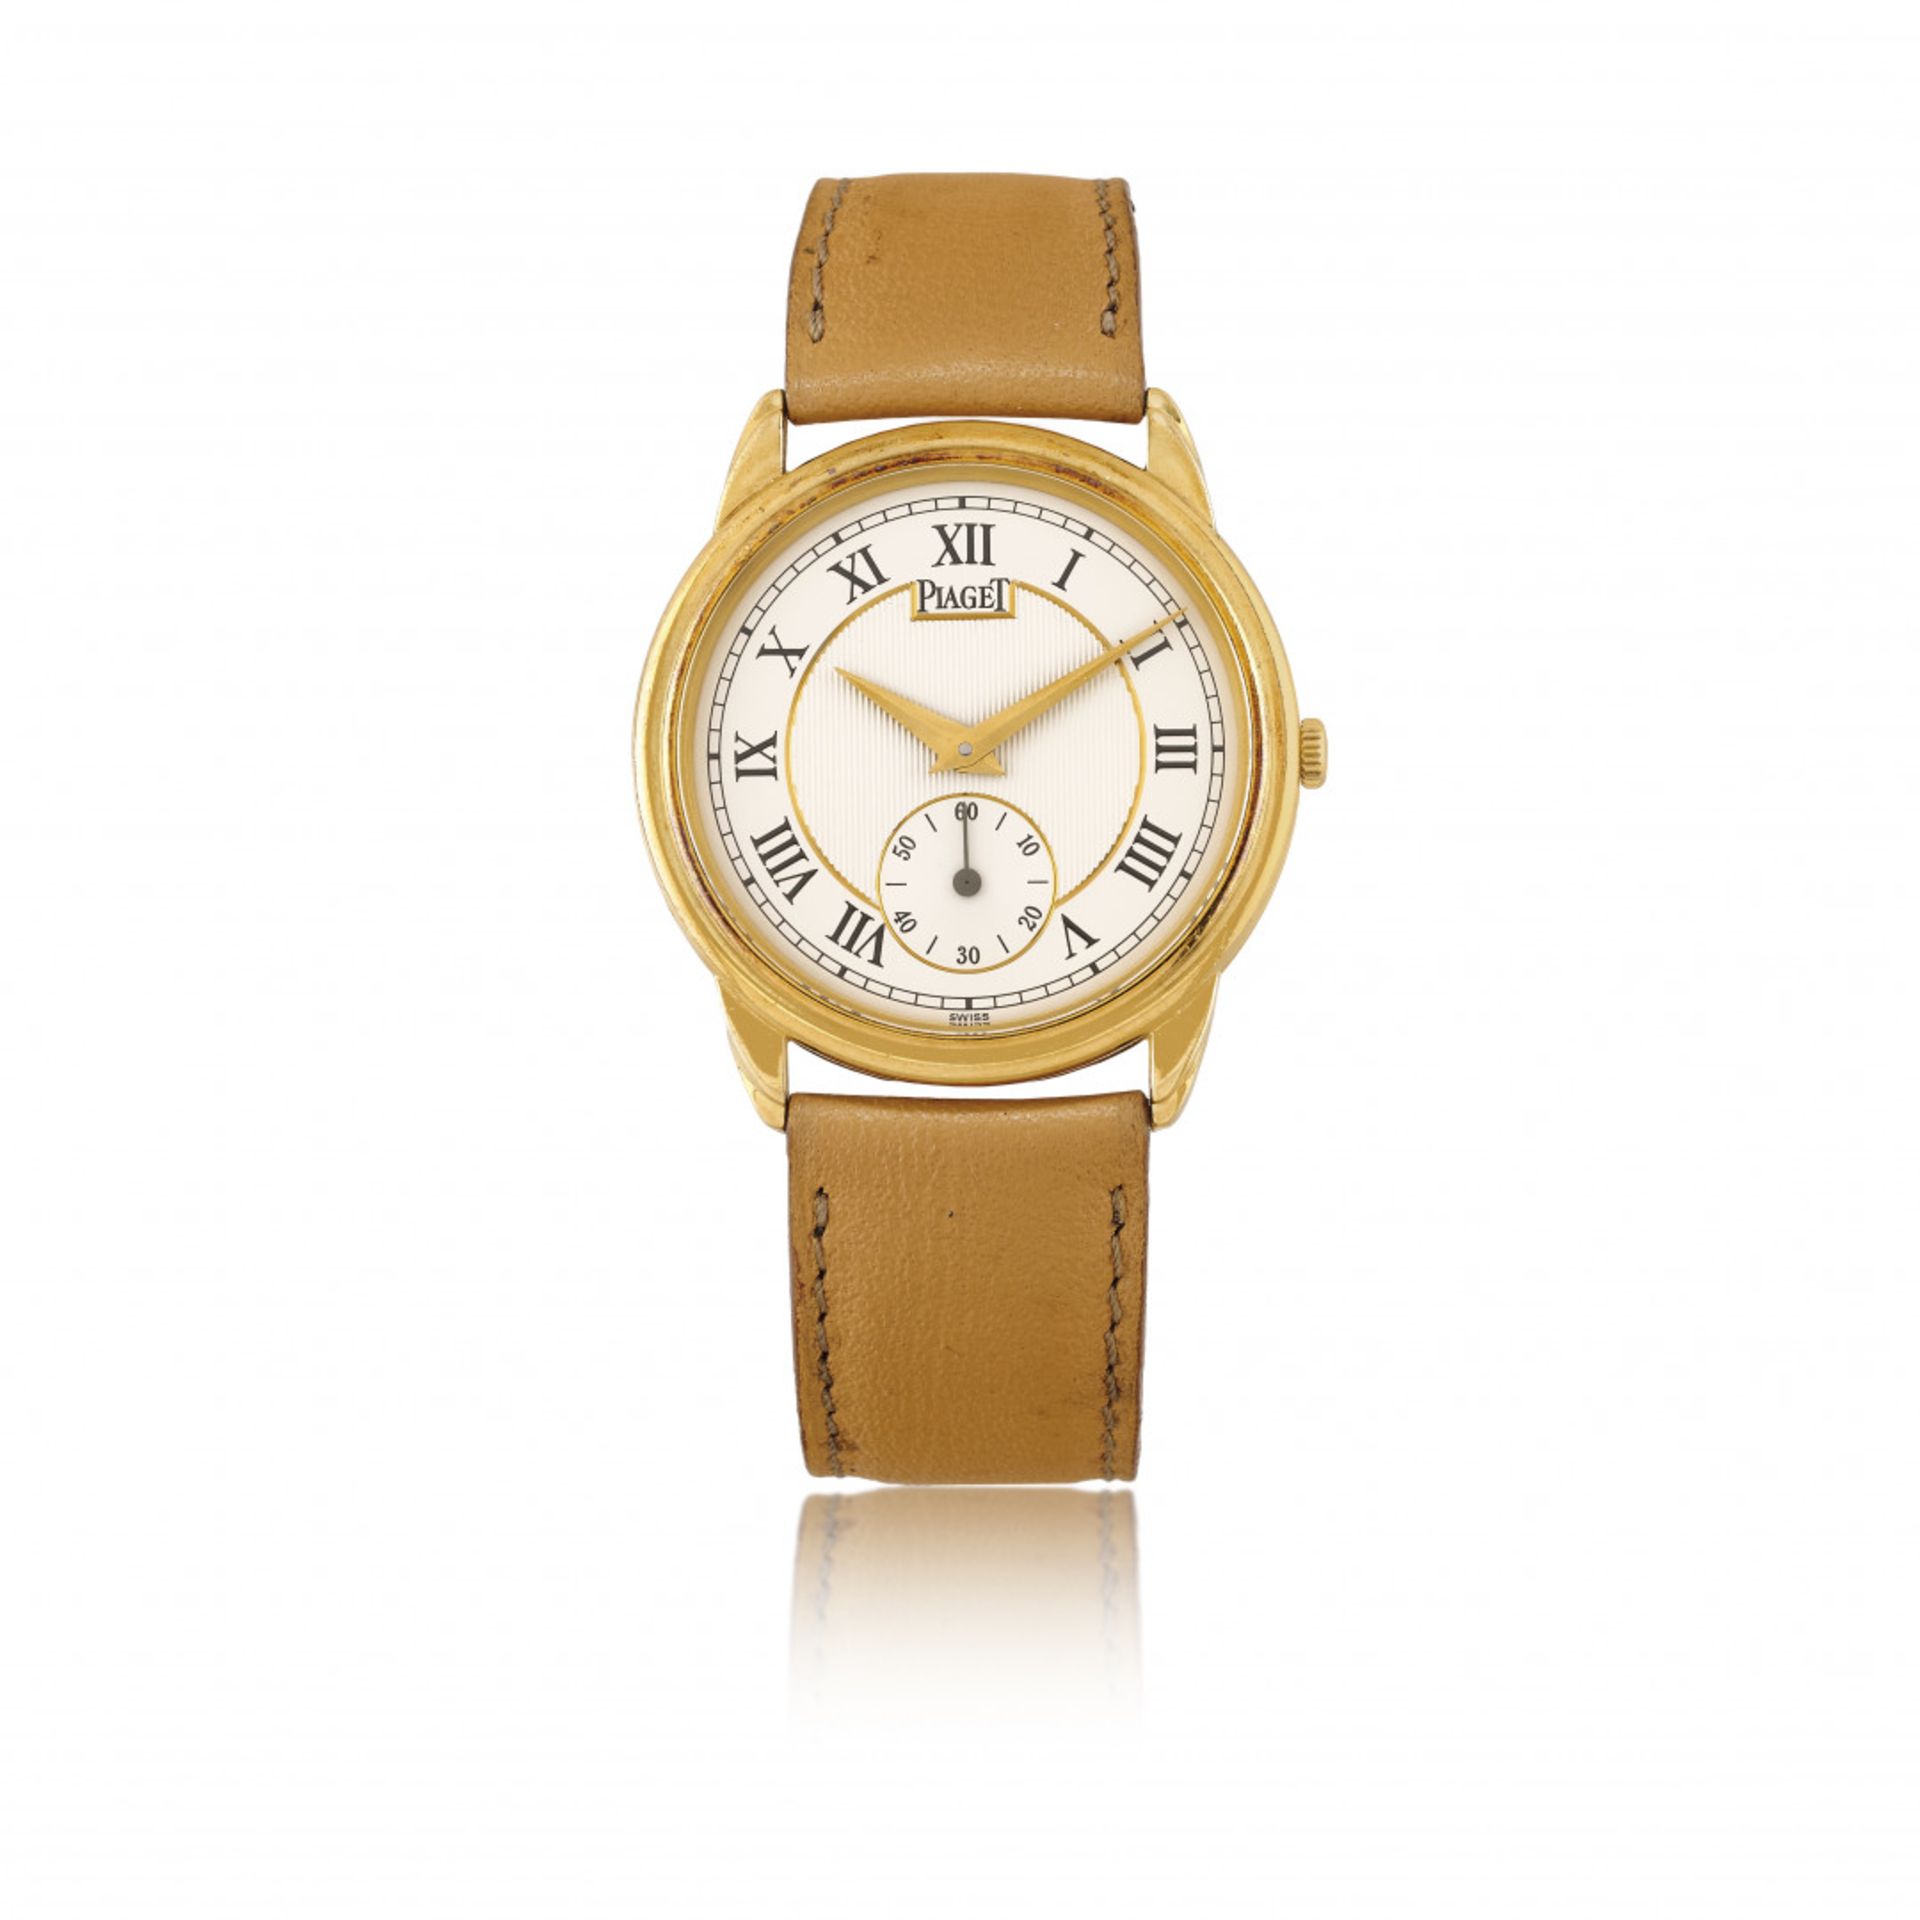 PIAGET GOUVERNEUR REF. 15968 IN GOLD, 90s